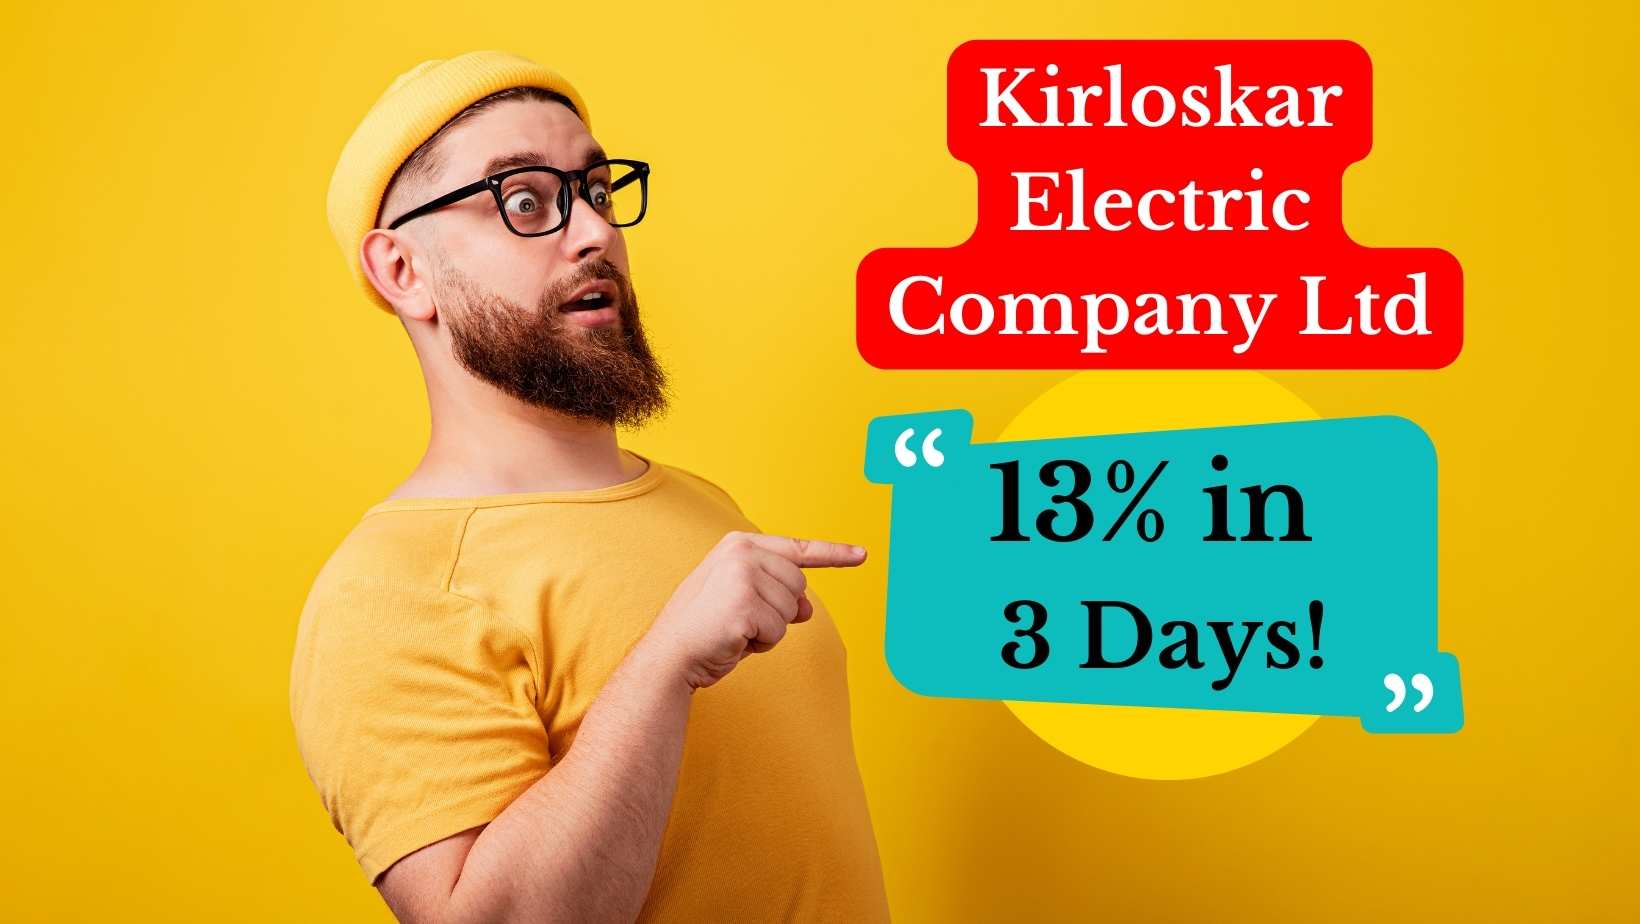 Kirloskar Electric Company Ltd – 13% in 3 Days and Going On!